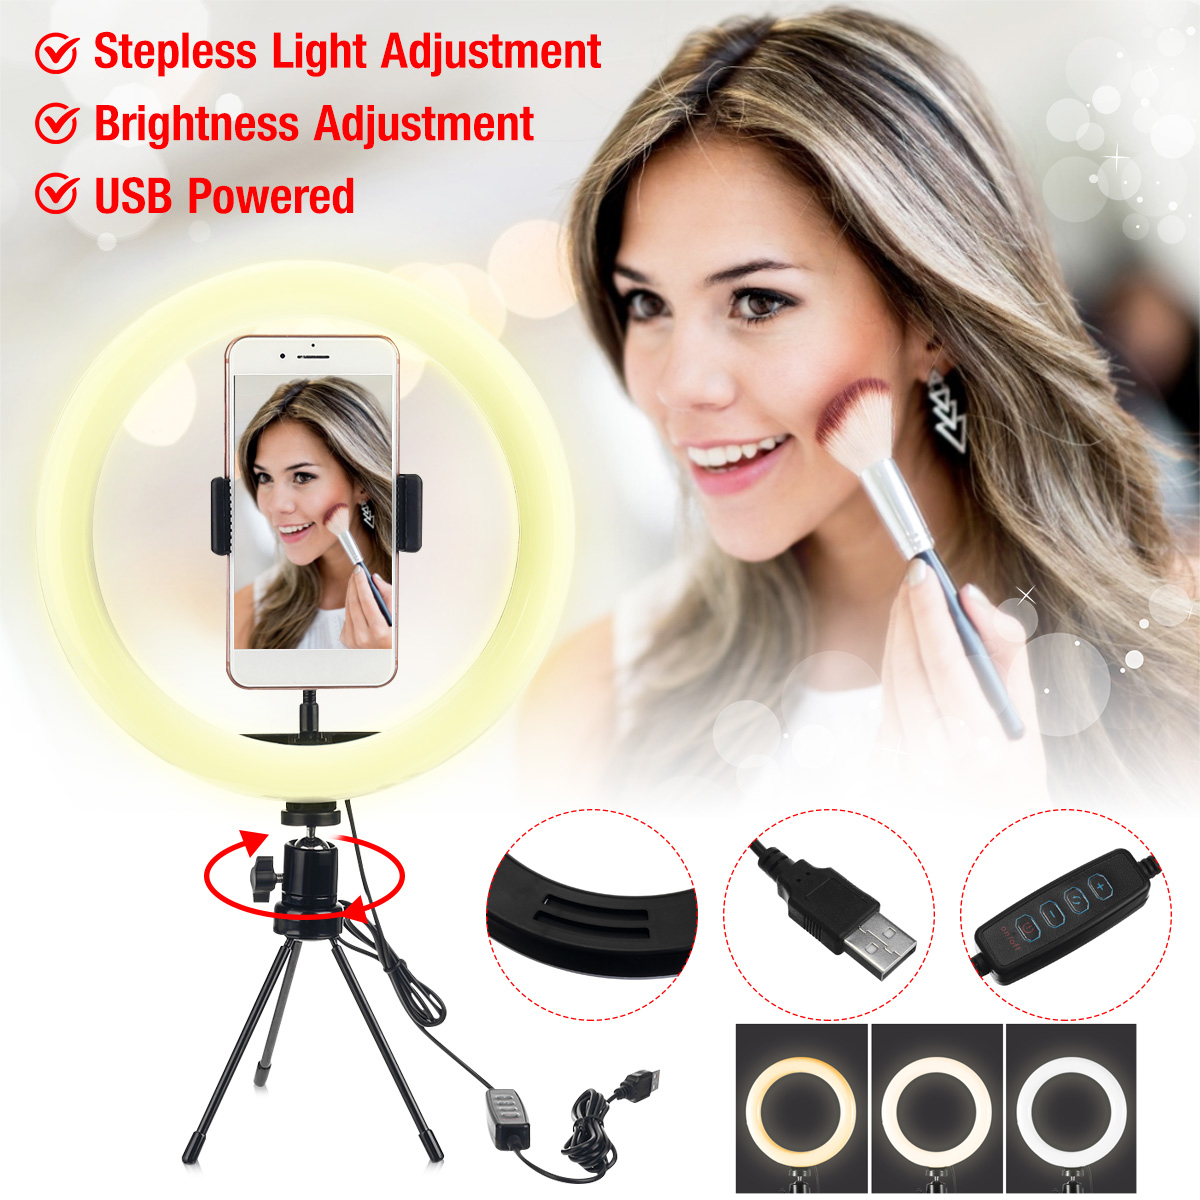 Dimmable-LED-Ring-Light-Lamp-18CM-26CM-Fill-Light-for-Makeup-Live-Stream-Selfie-Photography-Video-Re-1680025-1